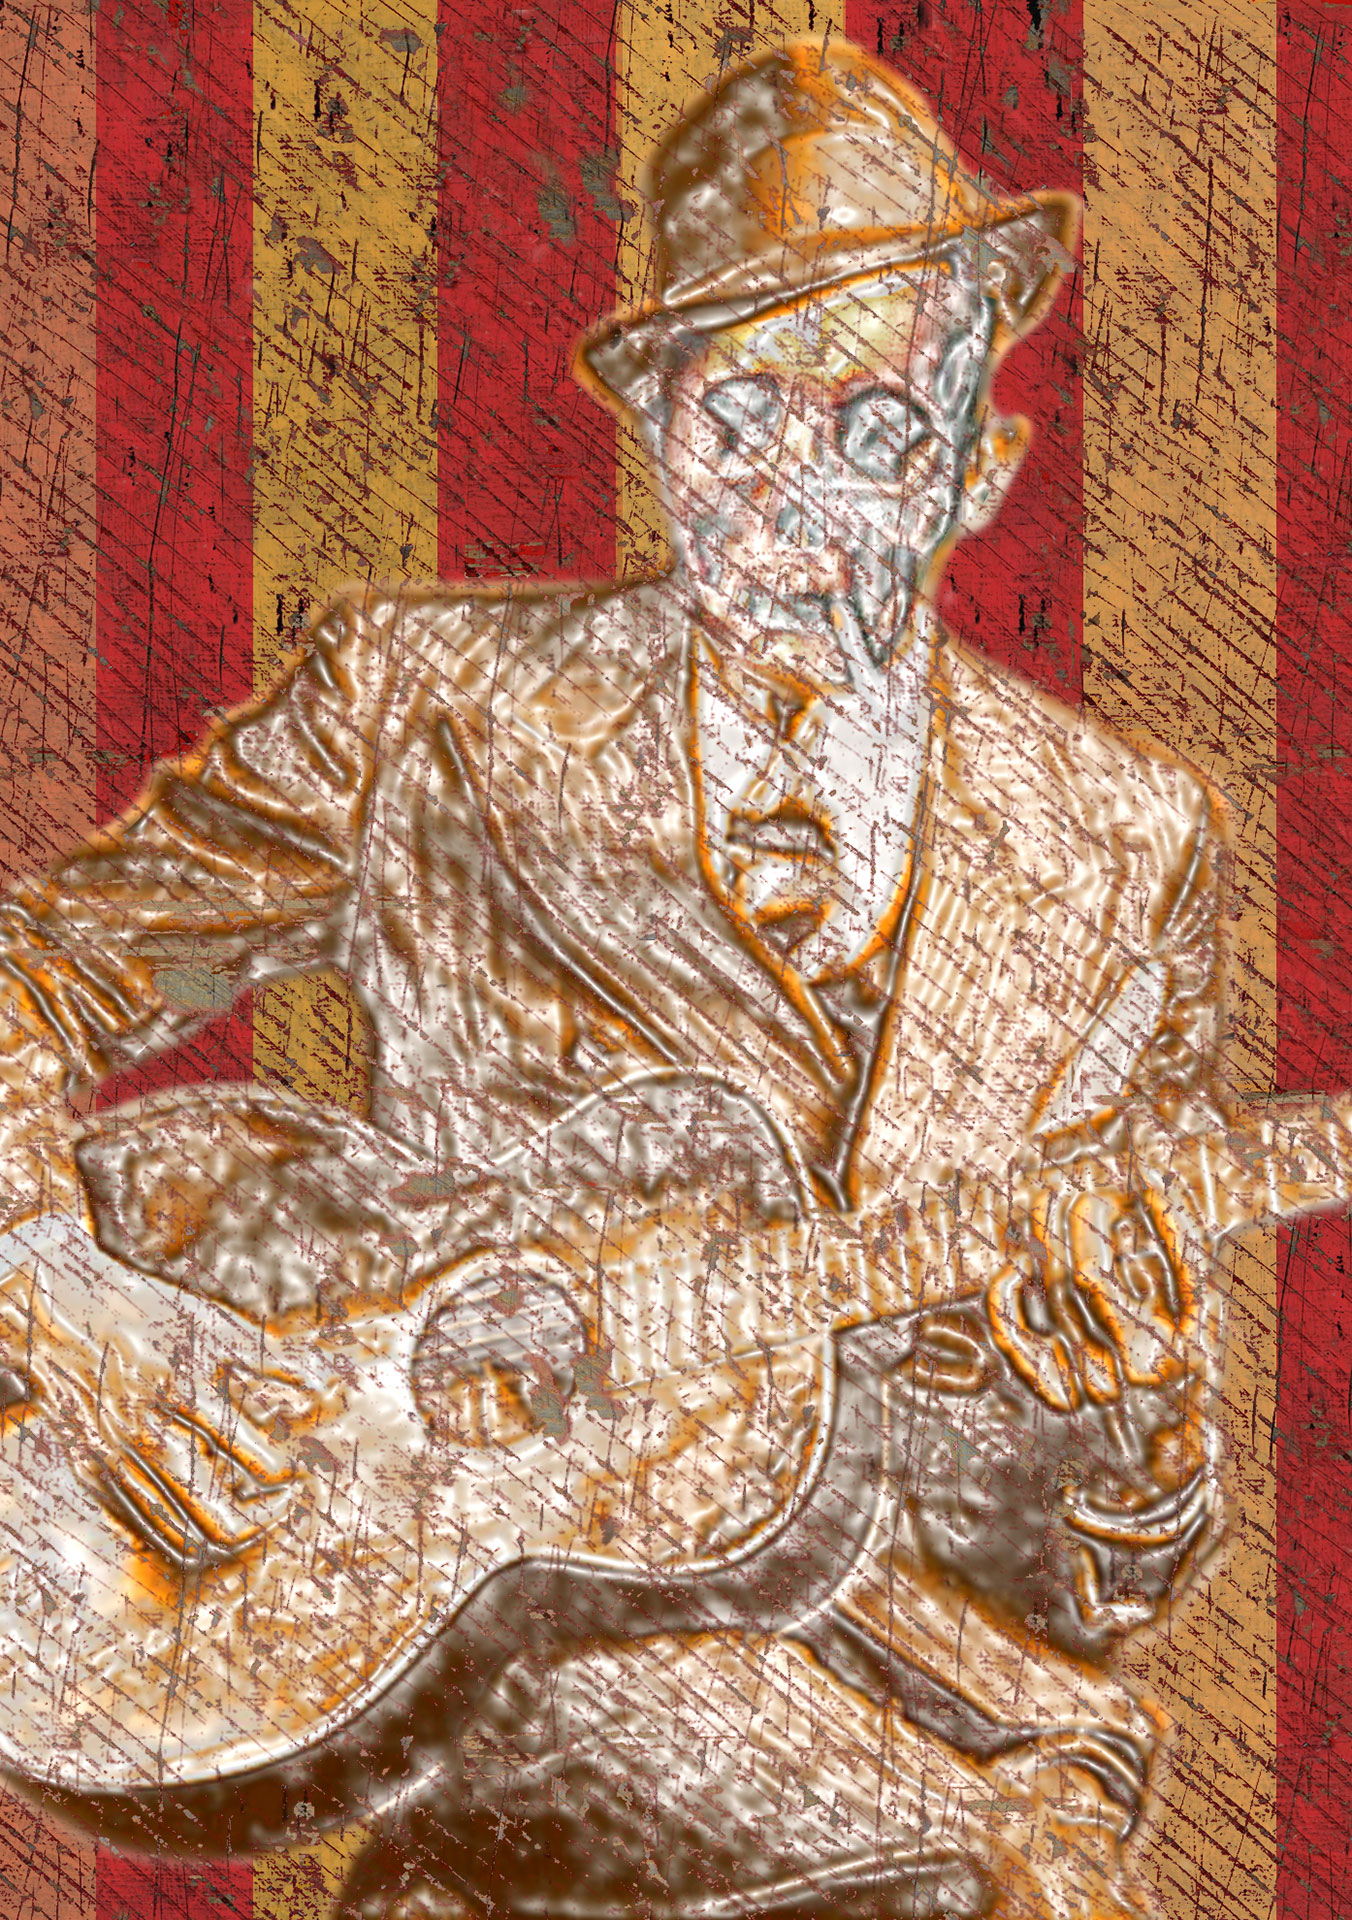 A painting of Robert Johnson by the Welsh-born, Chicago-based artist and musician Jon Langford (used by permission of the artist)